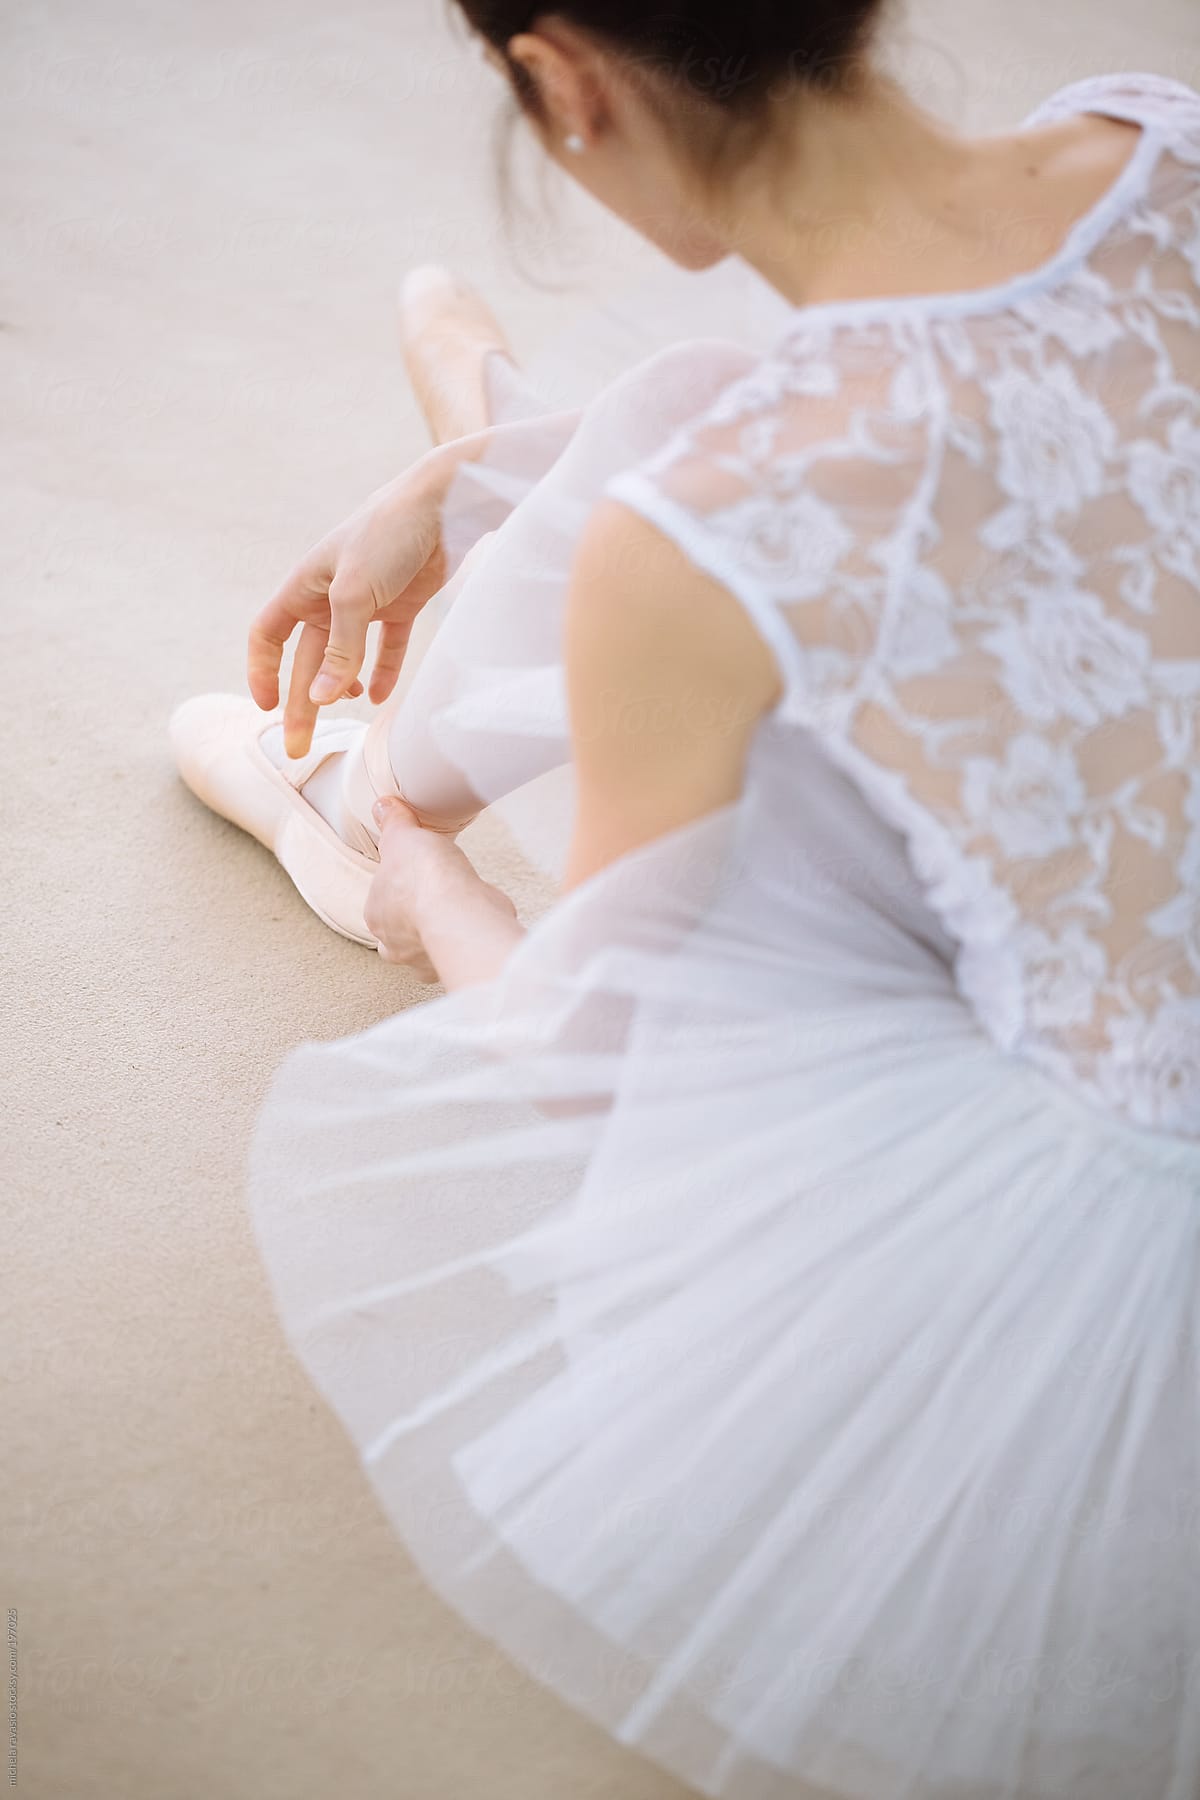 Classical dancer puts on pointe shoes